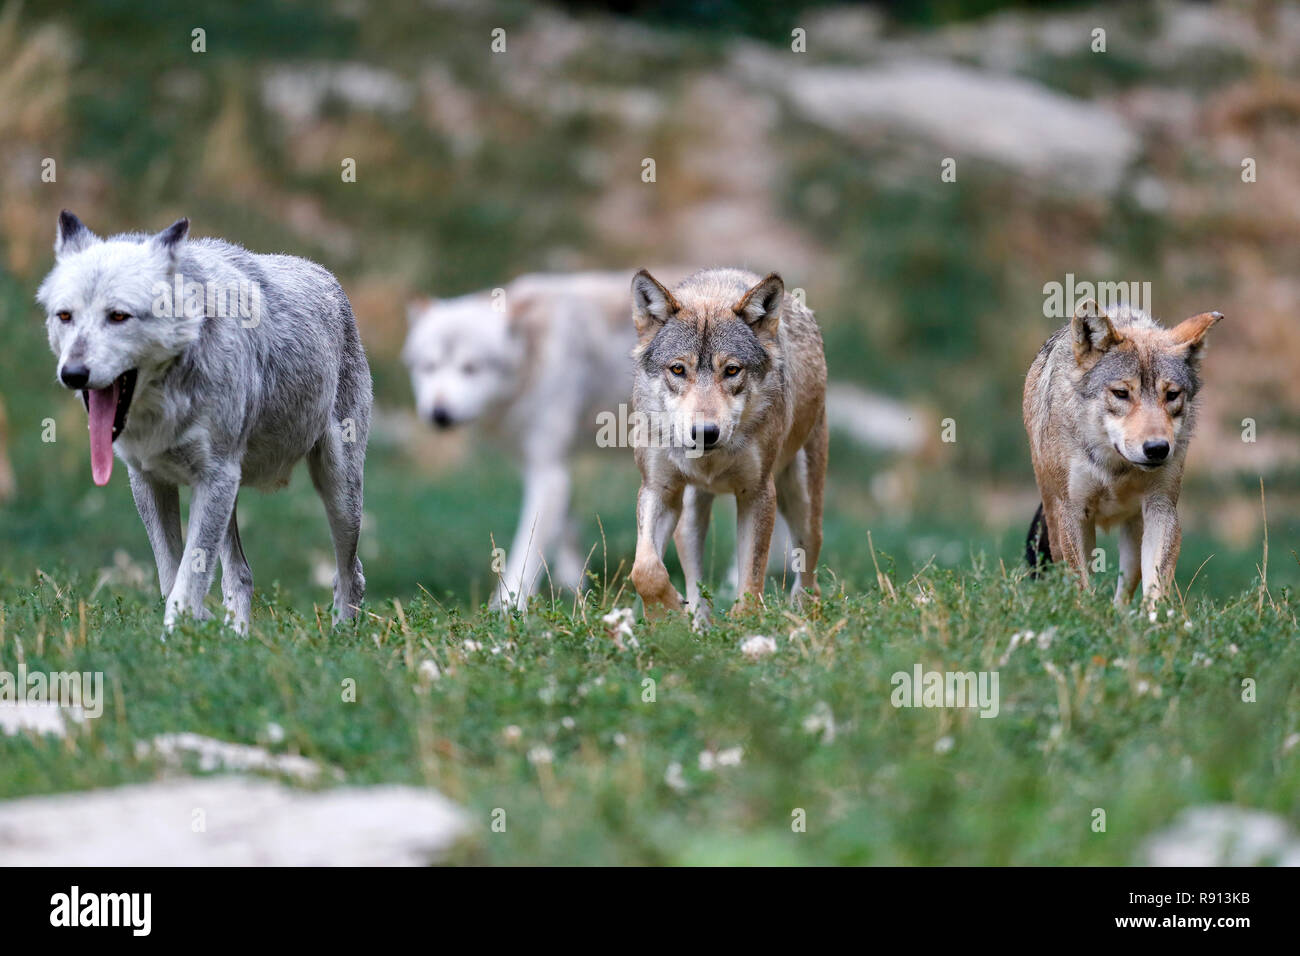 Timber Wolf (Canis lupus lycaon), Welpe, Captive Stockfoto